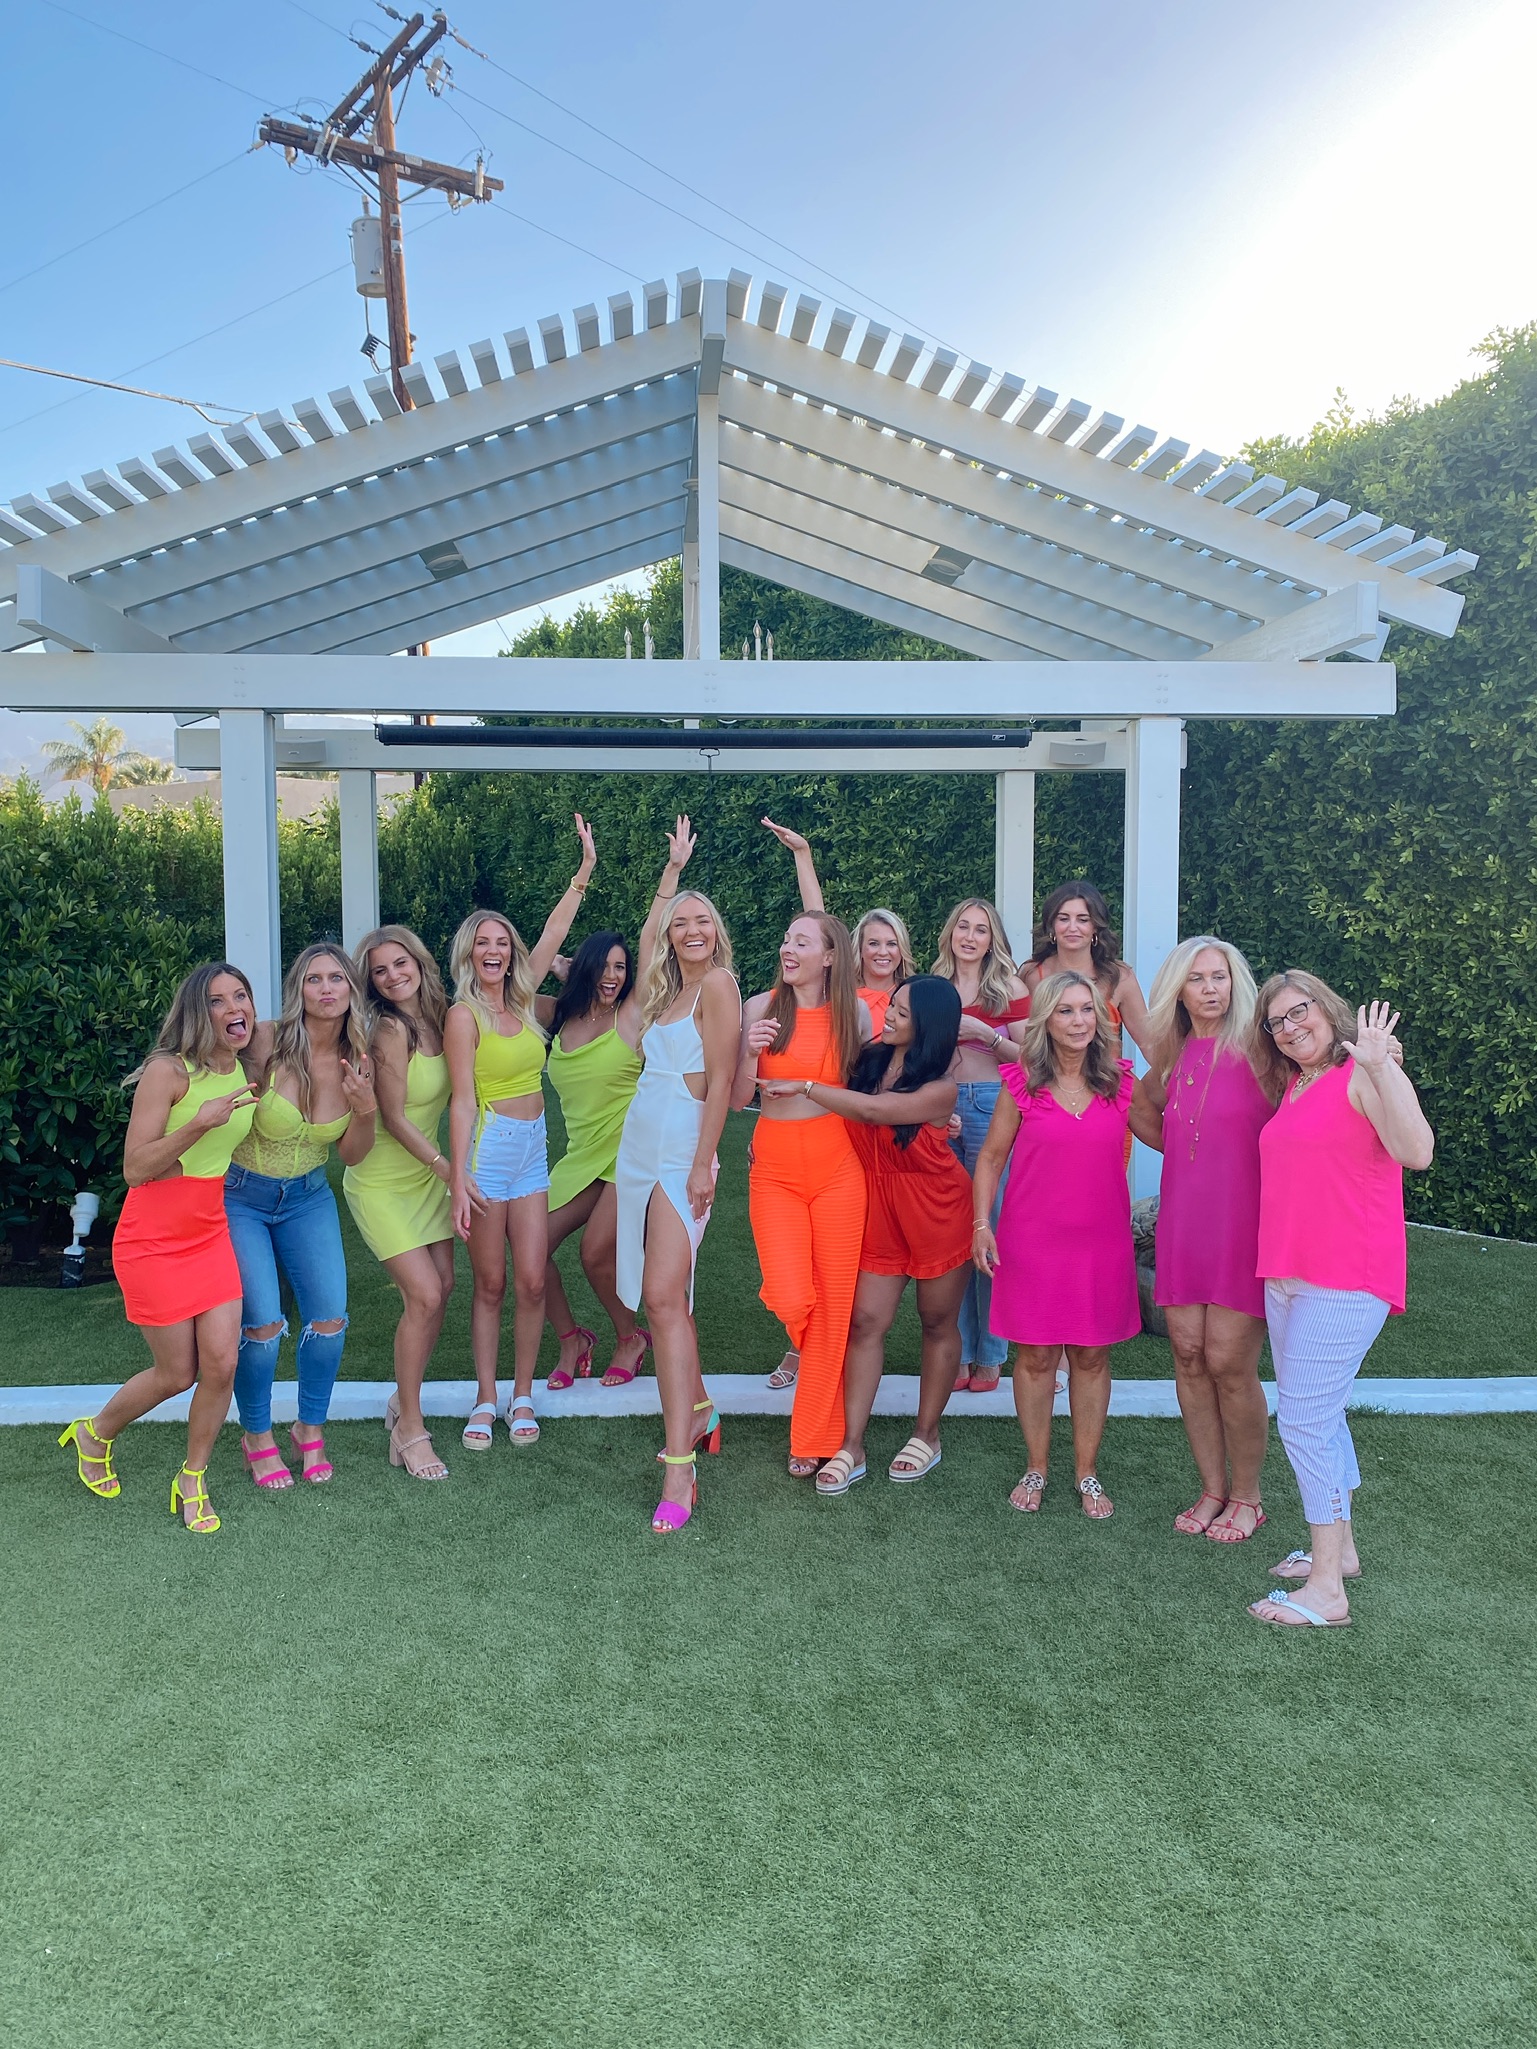 Tips for the Perfect Bachelorette Party in Palm Springs